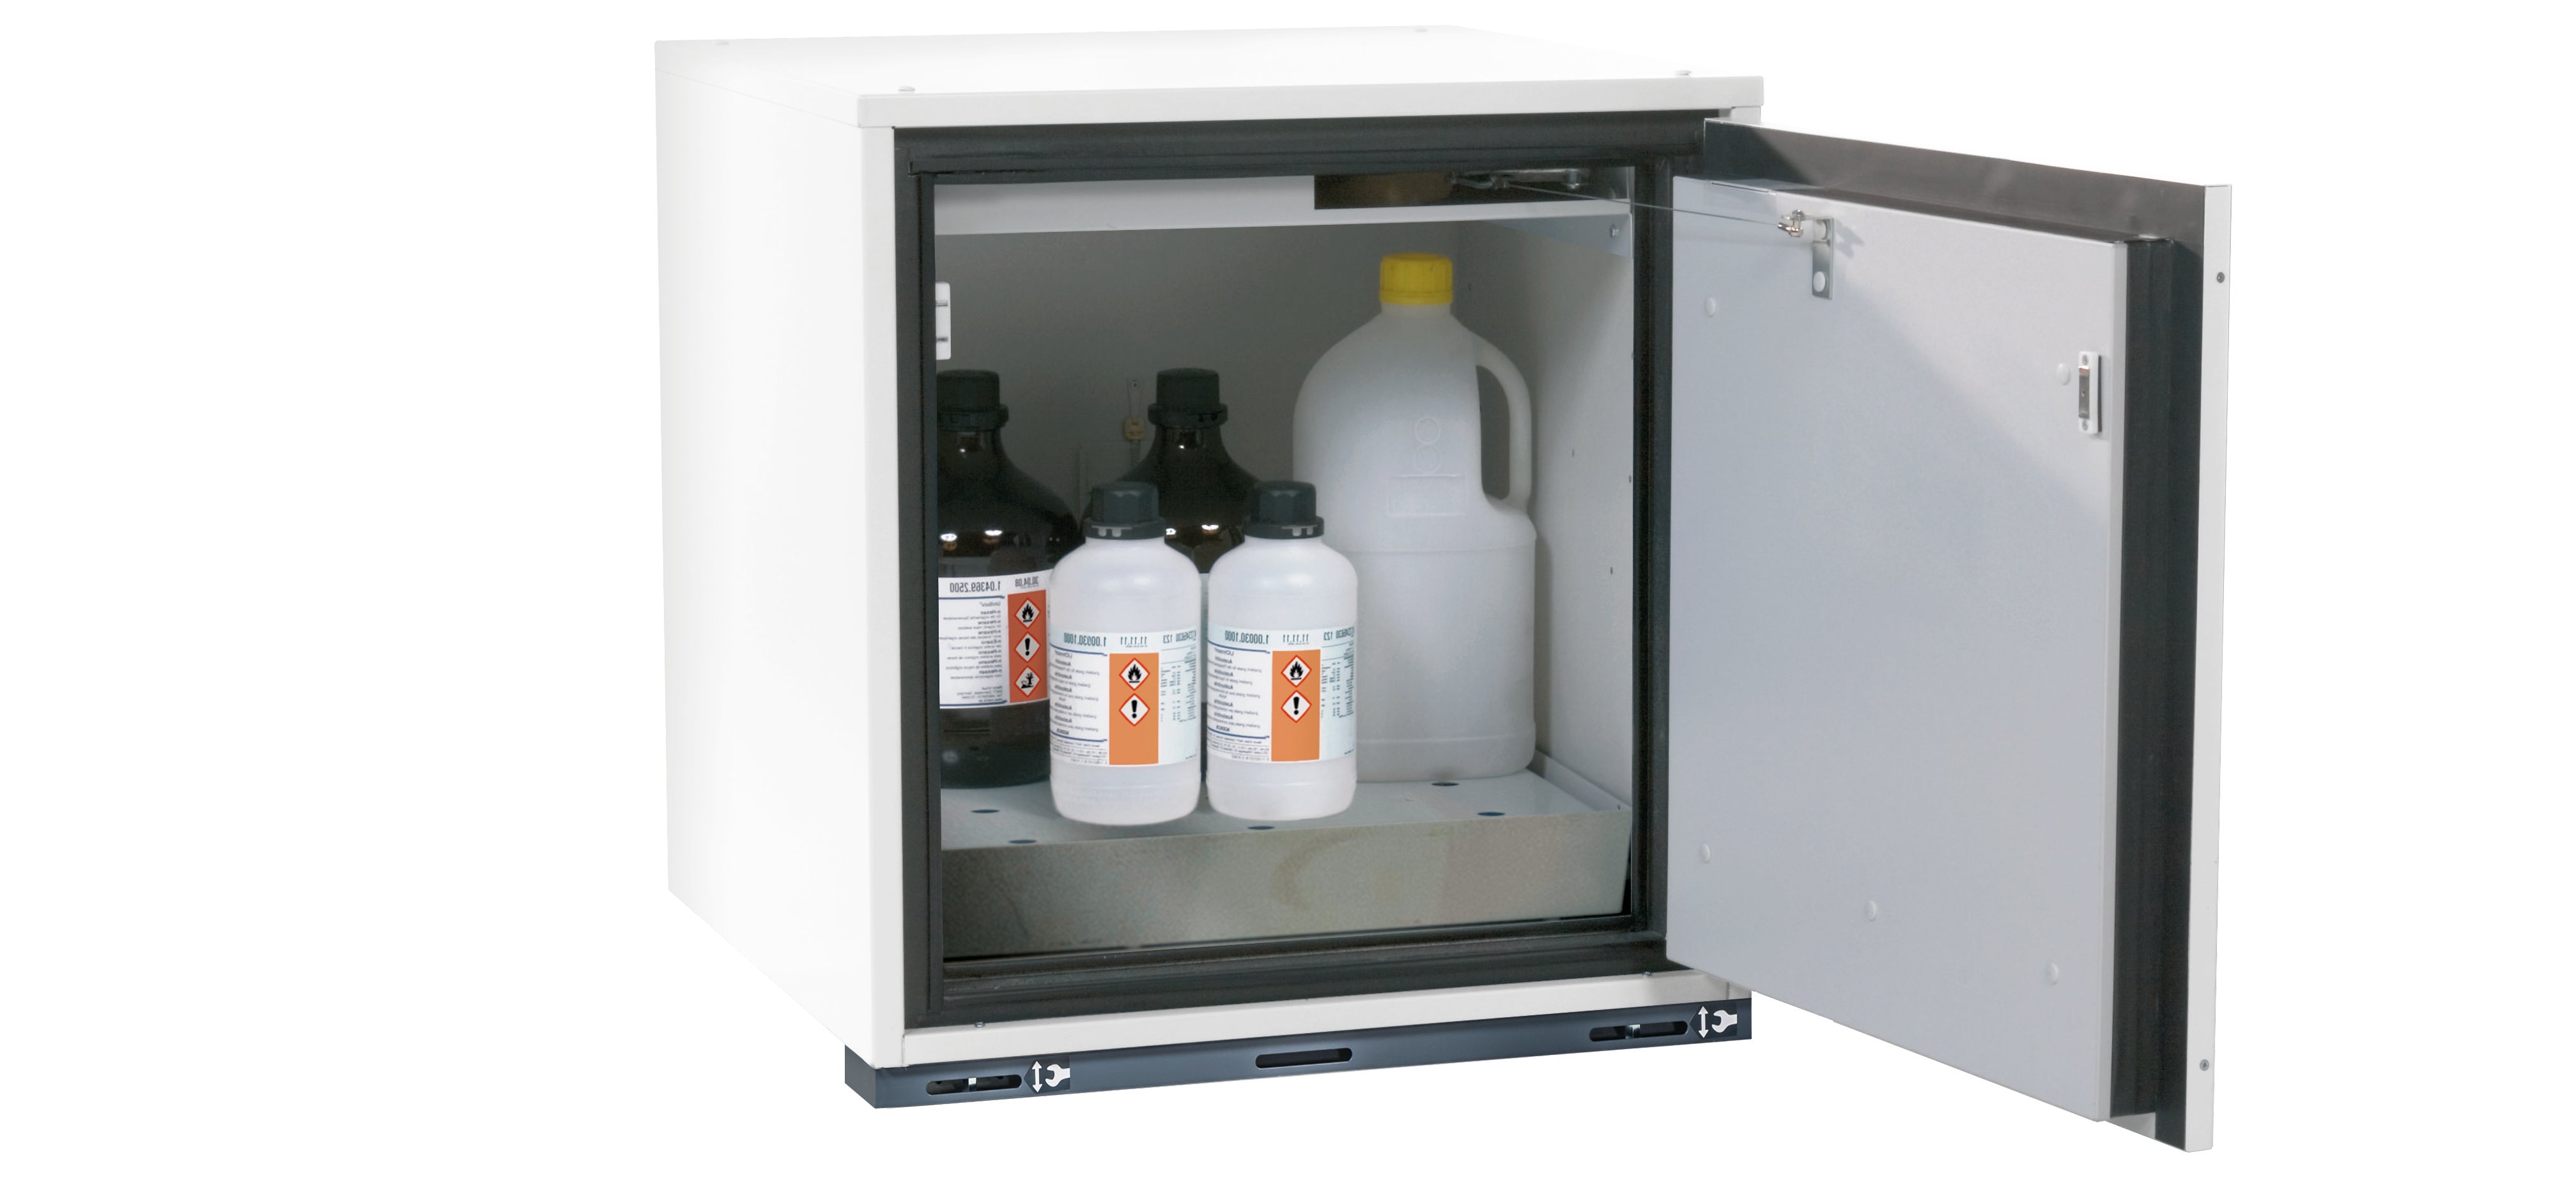 Type 90 safety base cabinet UB-T-90 model UB90.060.059.UL.TR in laboratory white (similar to RAL 9016) with 1x perforated sheet insert standard (stainless steel 1.4016)